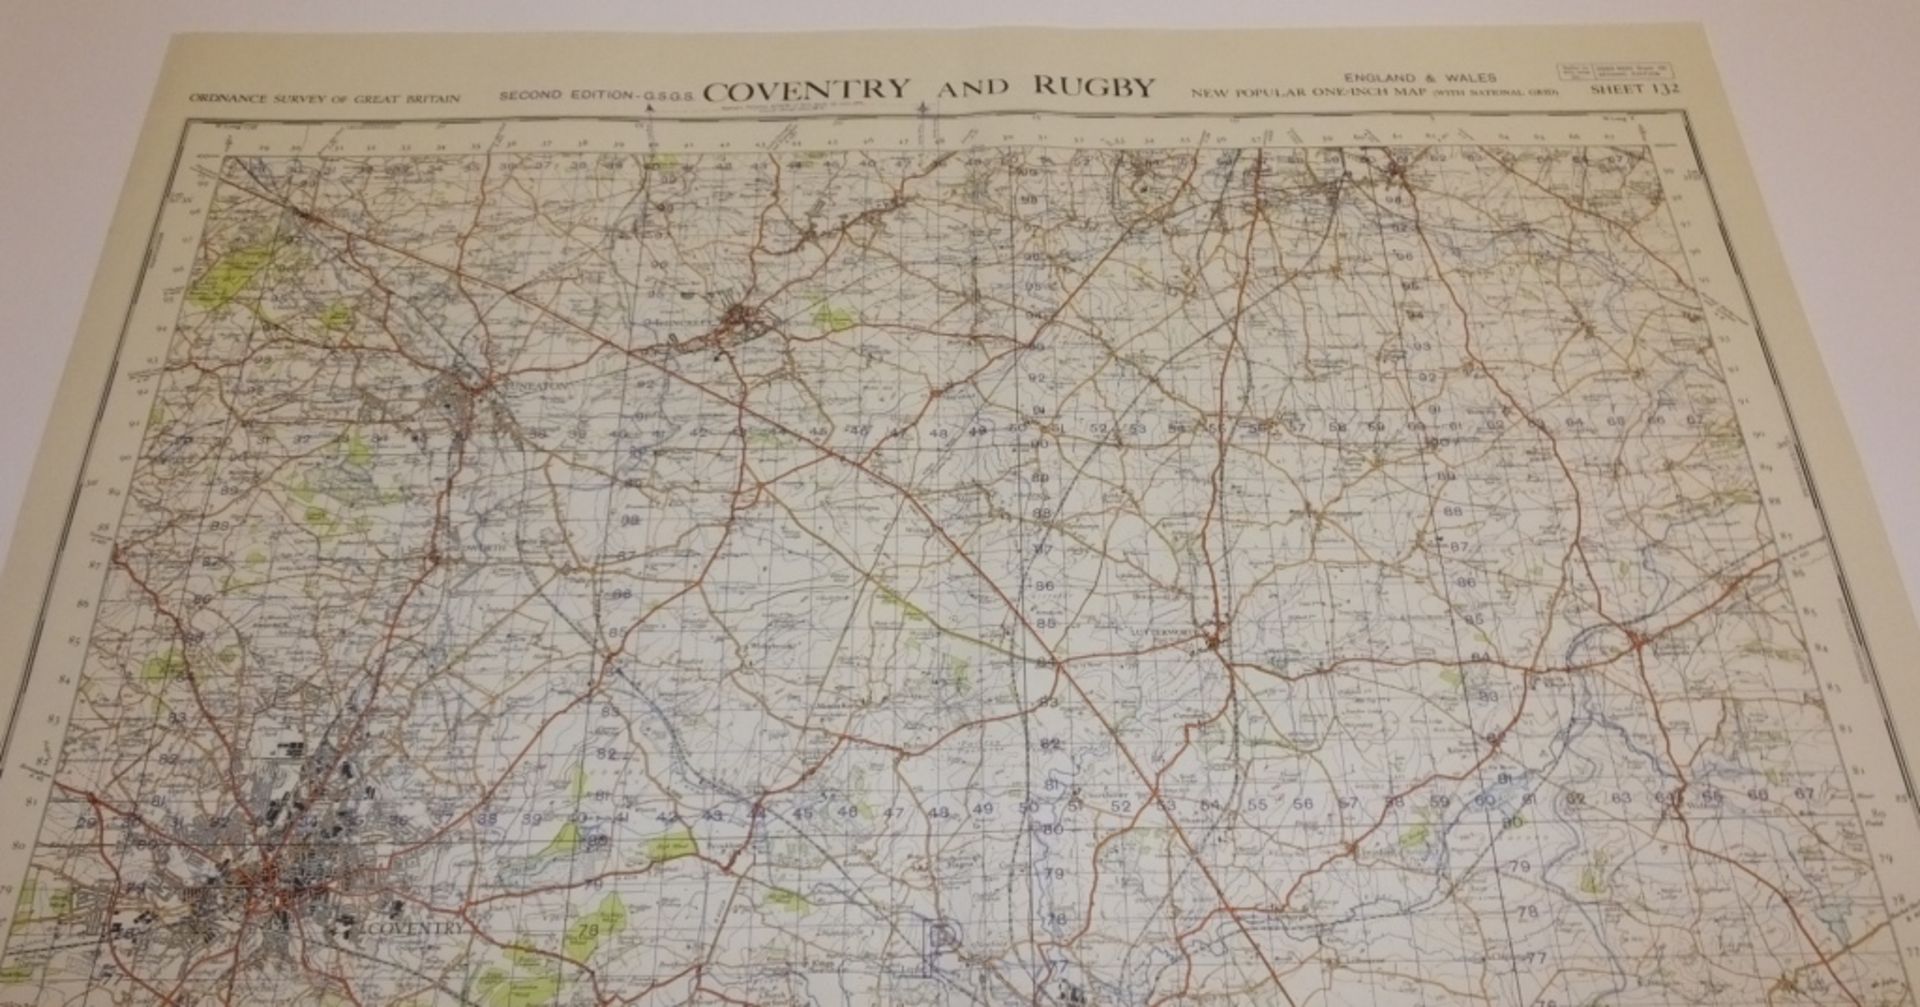 18x ENGLAND & WALES MAP COVENTRY RUENGLAND & WALESY 1INCH 1MILE 1952 2ND EDITION 4620GSGS - Image 2 of 5